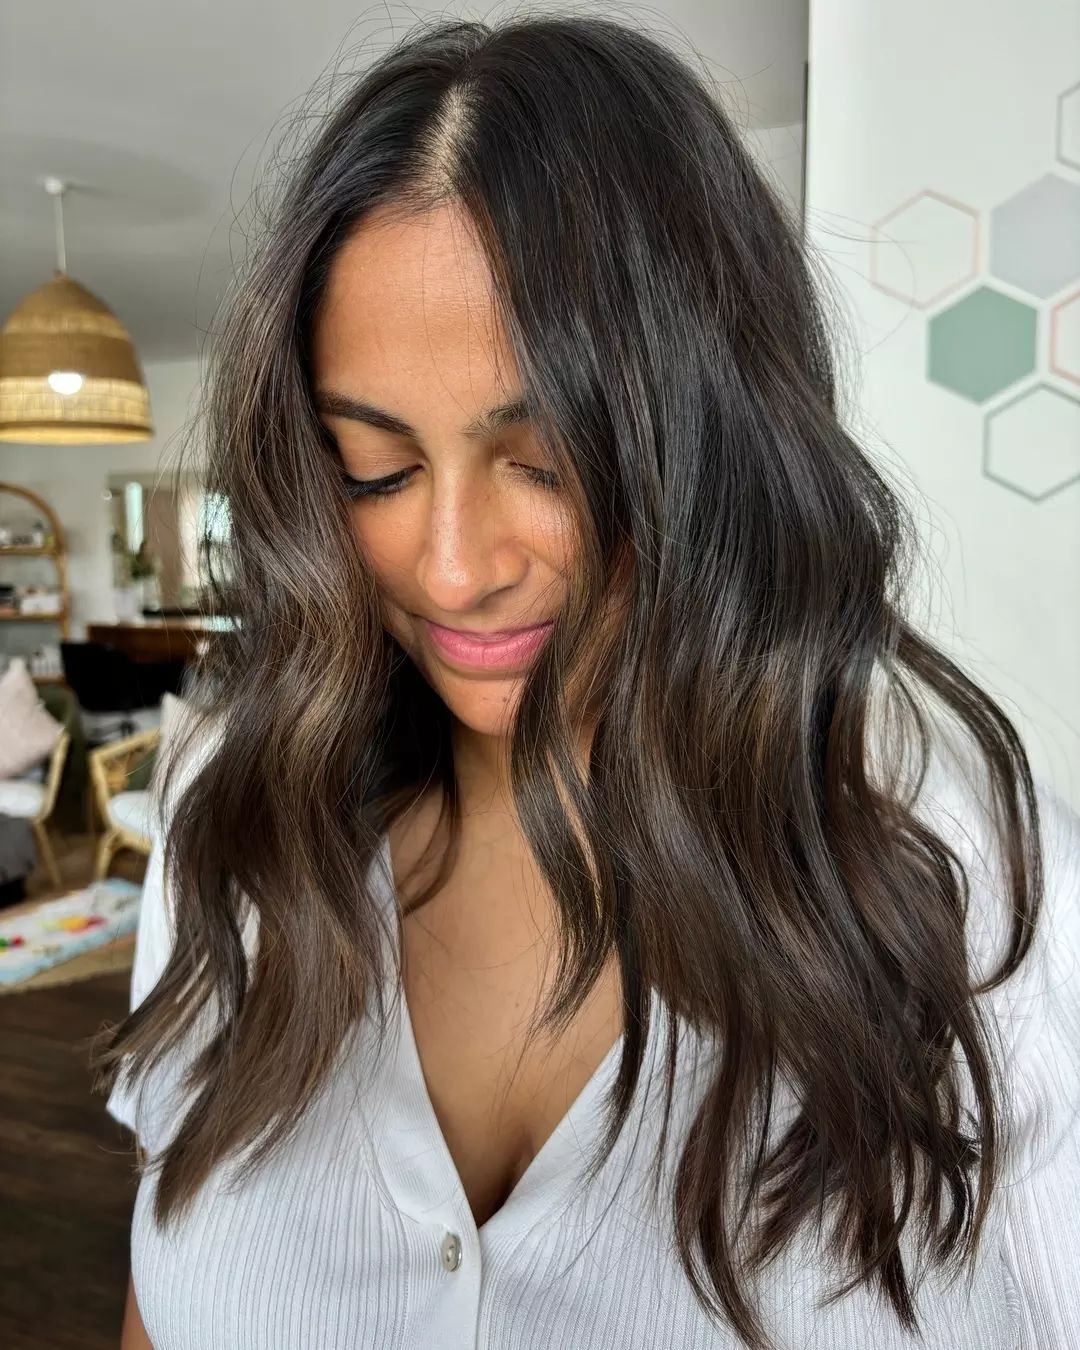 ✨ Embracing the beauty of brunette vibes with these cascading tresses! 🌿💫&nbsp; Let's hear it for the brunettes! 🙌

#BrownHairJourney#BrunetteLife#BrunetteLove#BrunetteHair#BrunetteBeauty#BrunetteStyle#BrunetteShades
#BrunetteHighlights#WarmBrunet